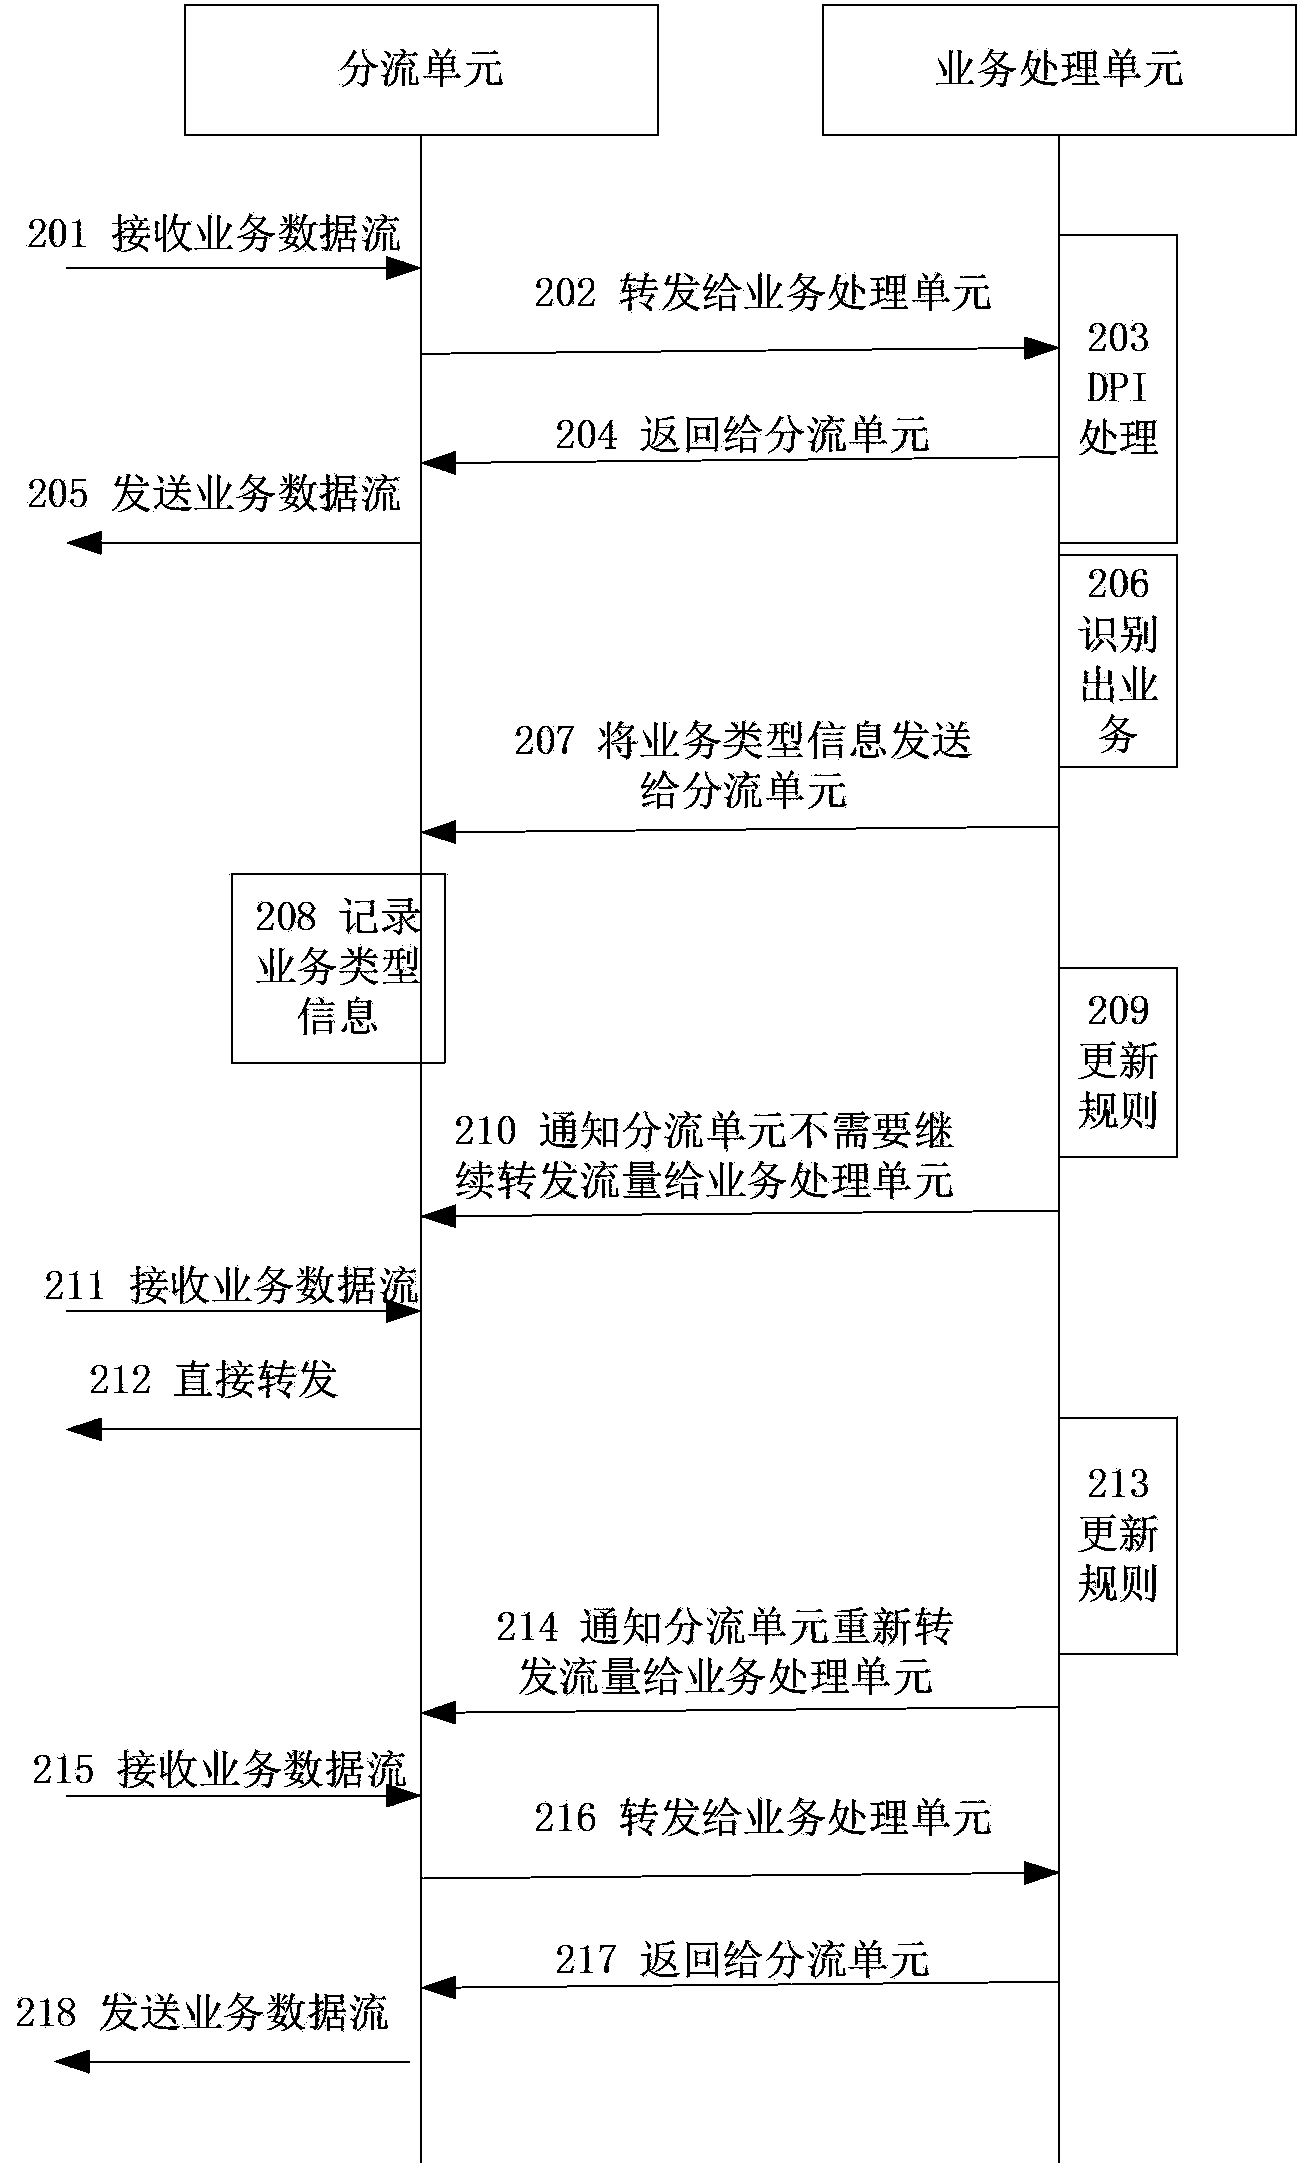 Method and system for processing service data